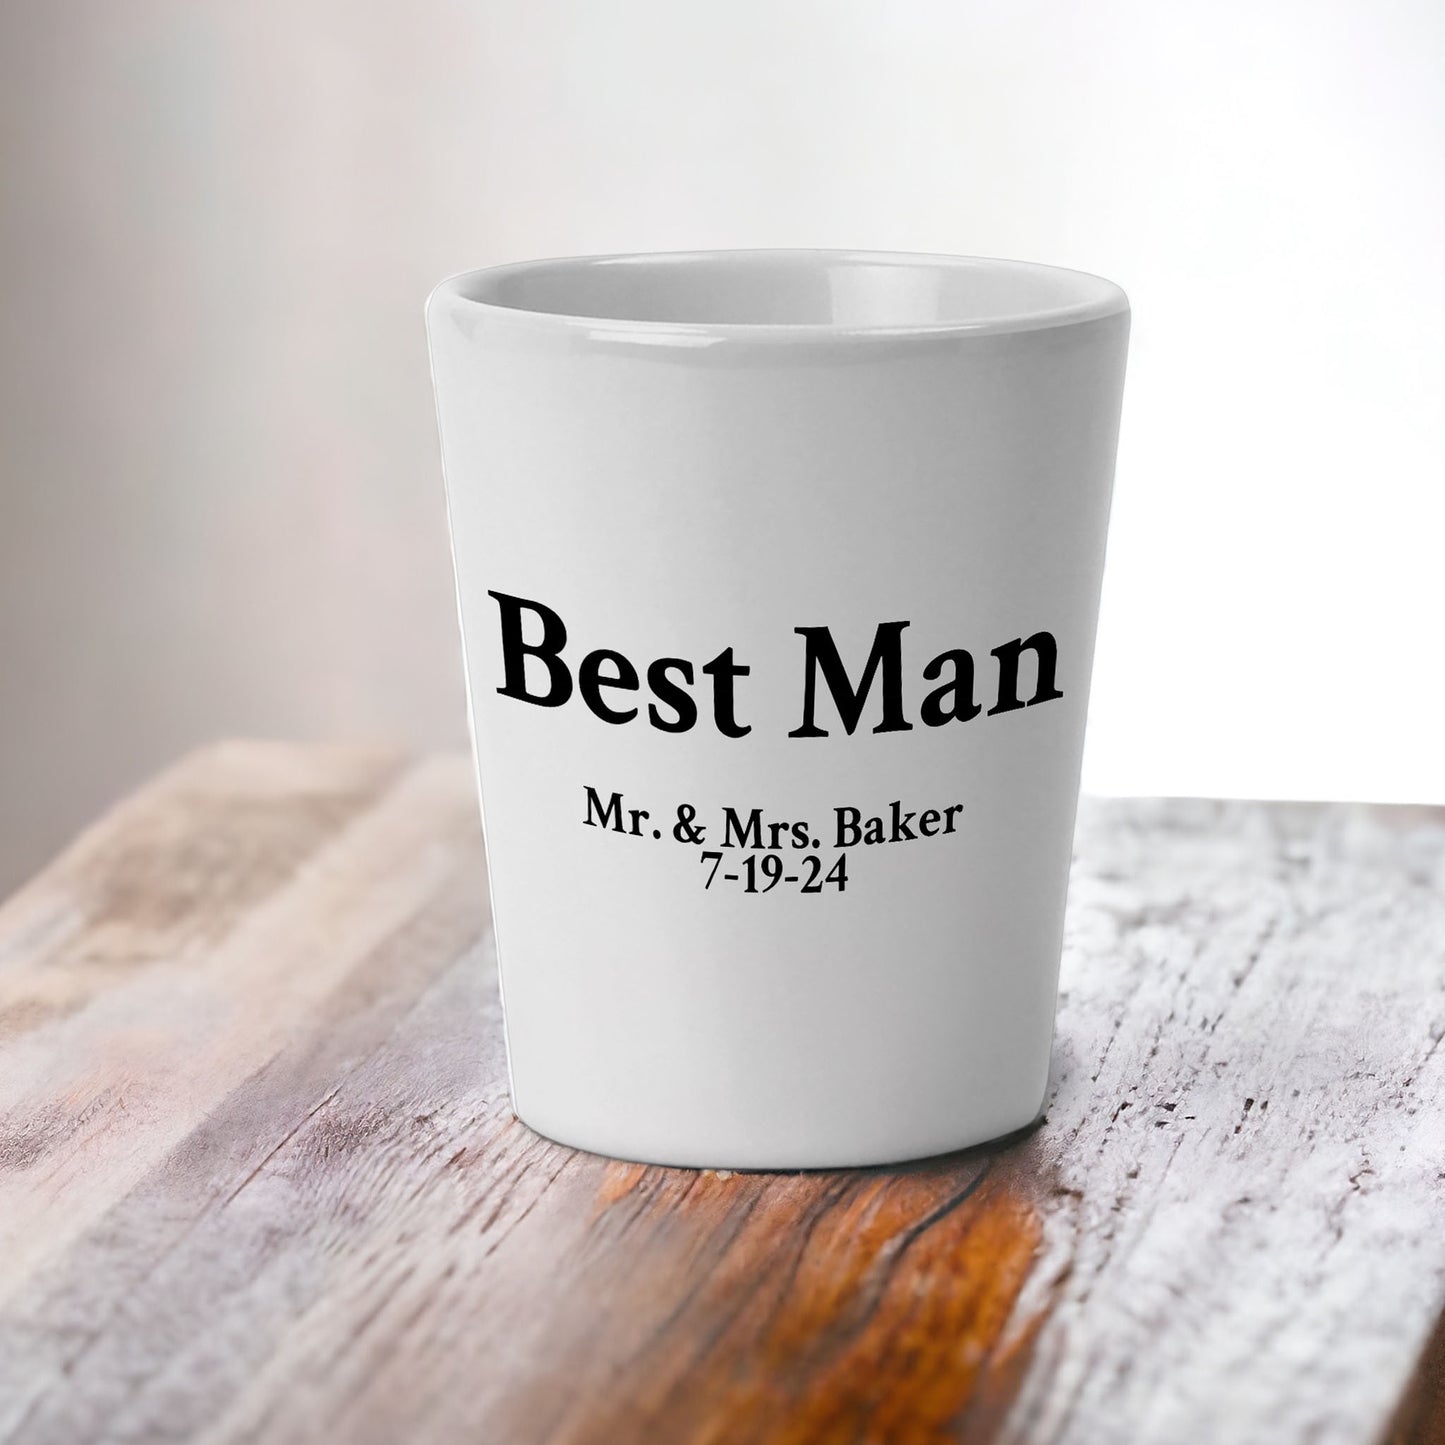 Personalized Shot Glass Groomsmen Gift - Bachelor Wedding Shot Glass with Picture